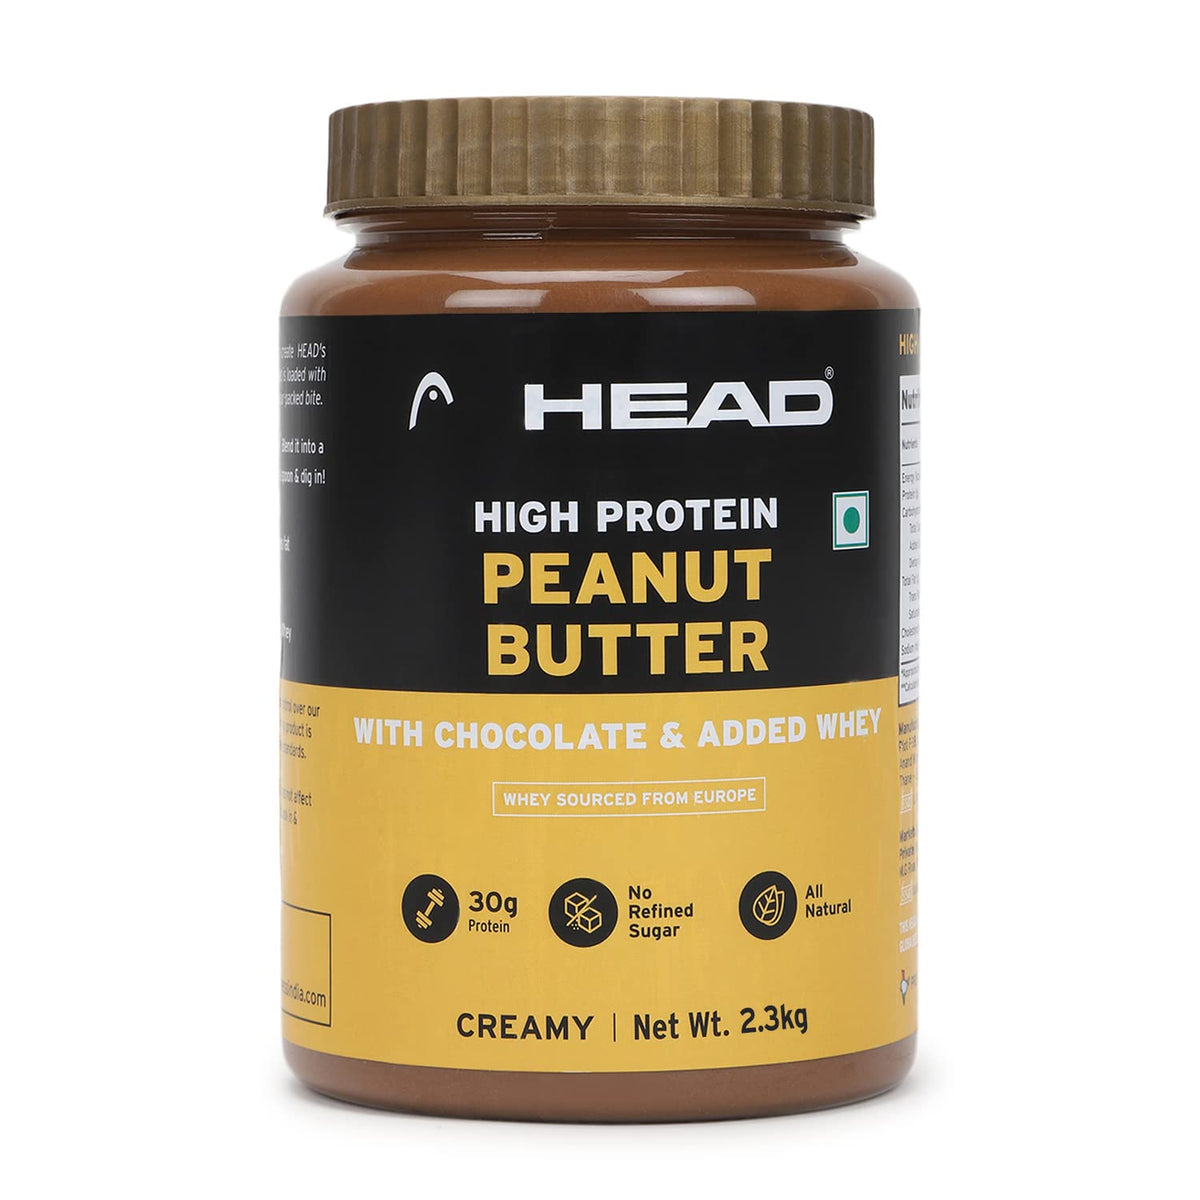 Head High Protein Peanut Butter (Chocolate, Creamy, 2.3Kg) | 100% Pure Nuts | Added Whey | Protein Rich Nutritious Snack